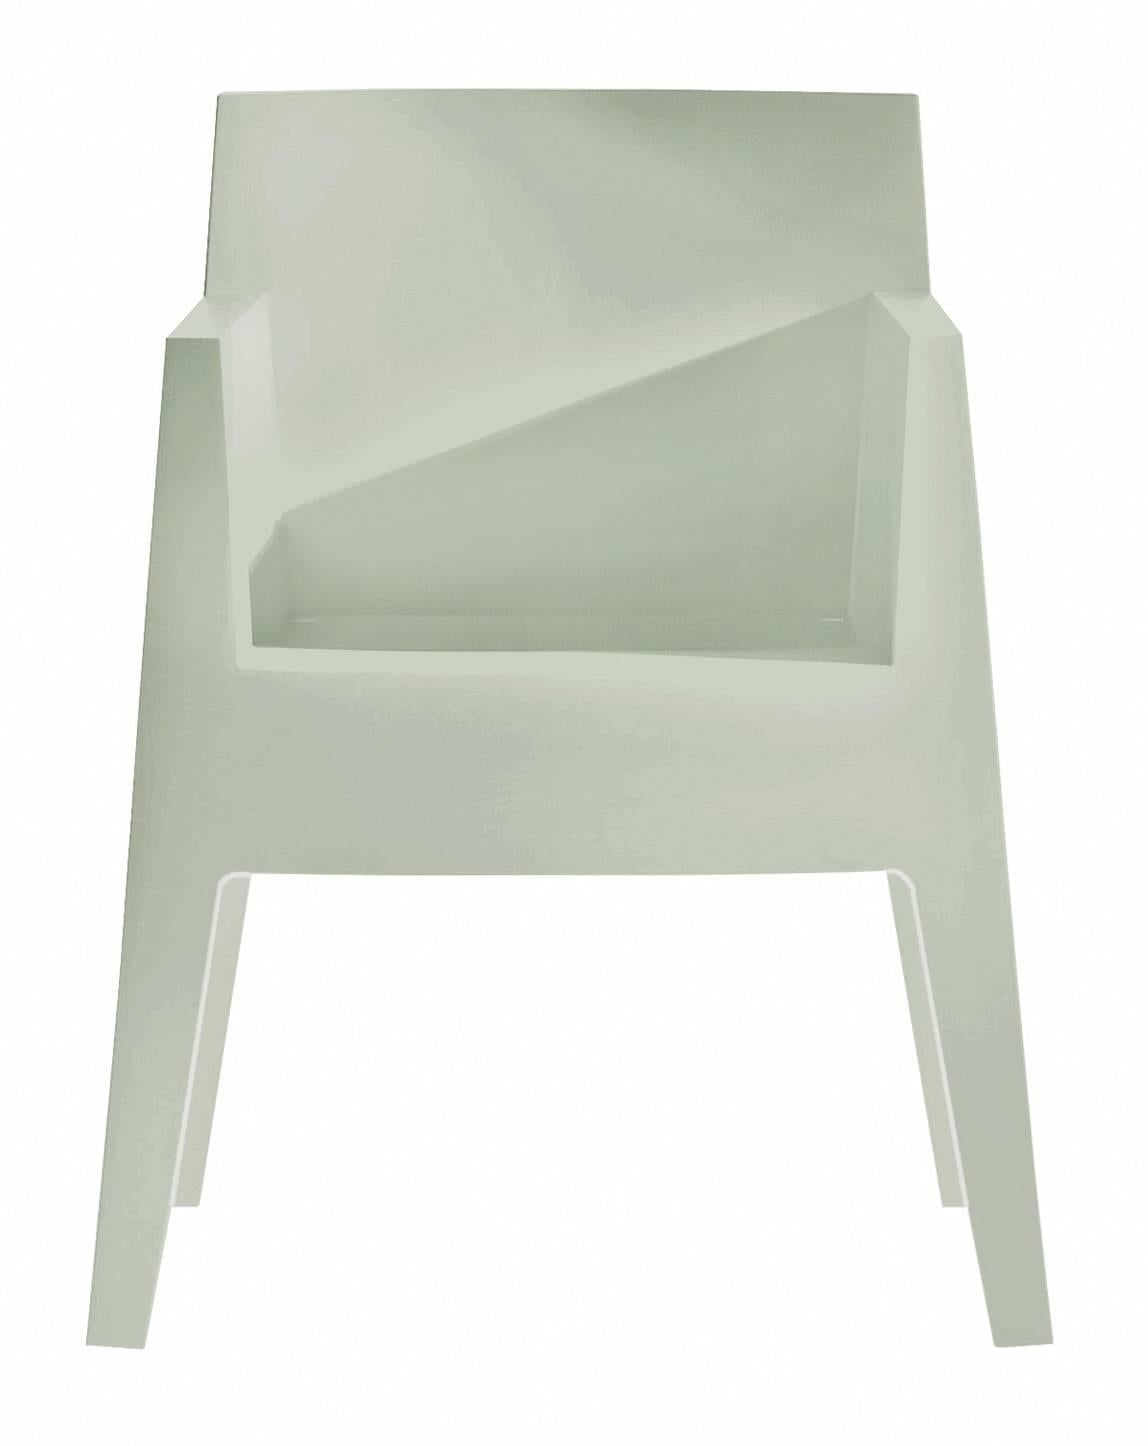 philippe starck toy chair